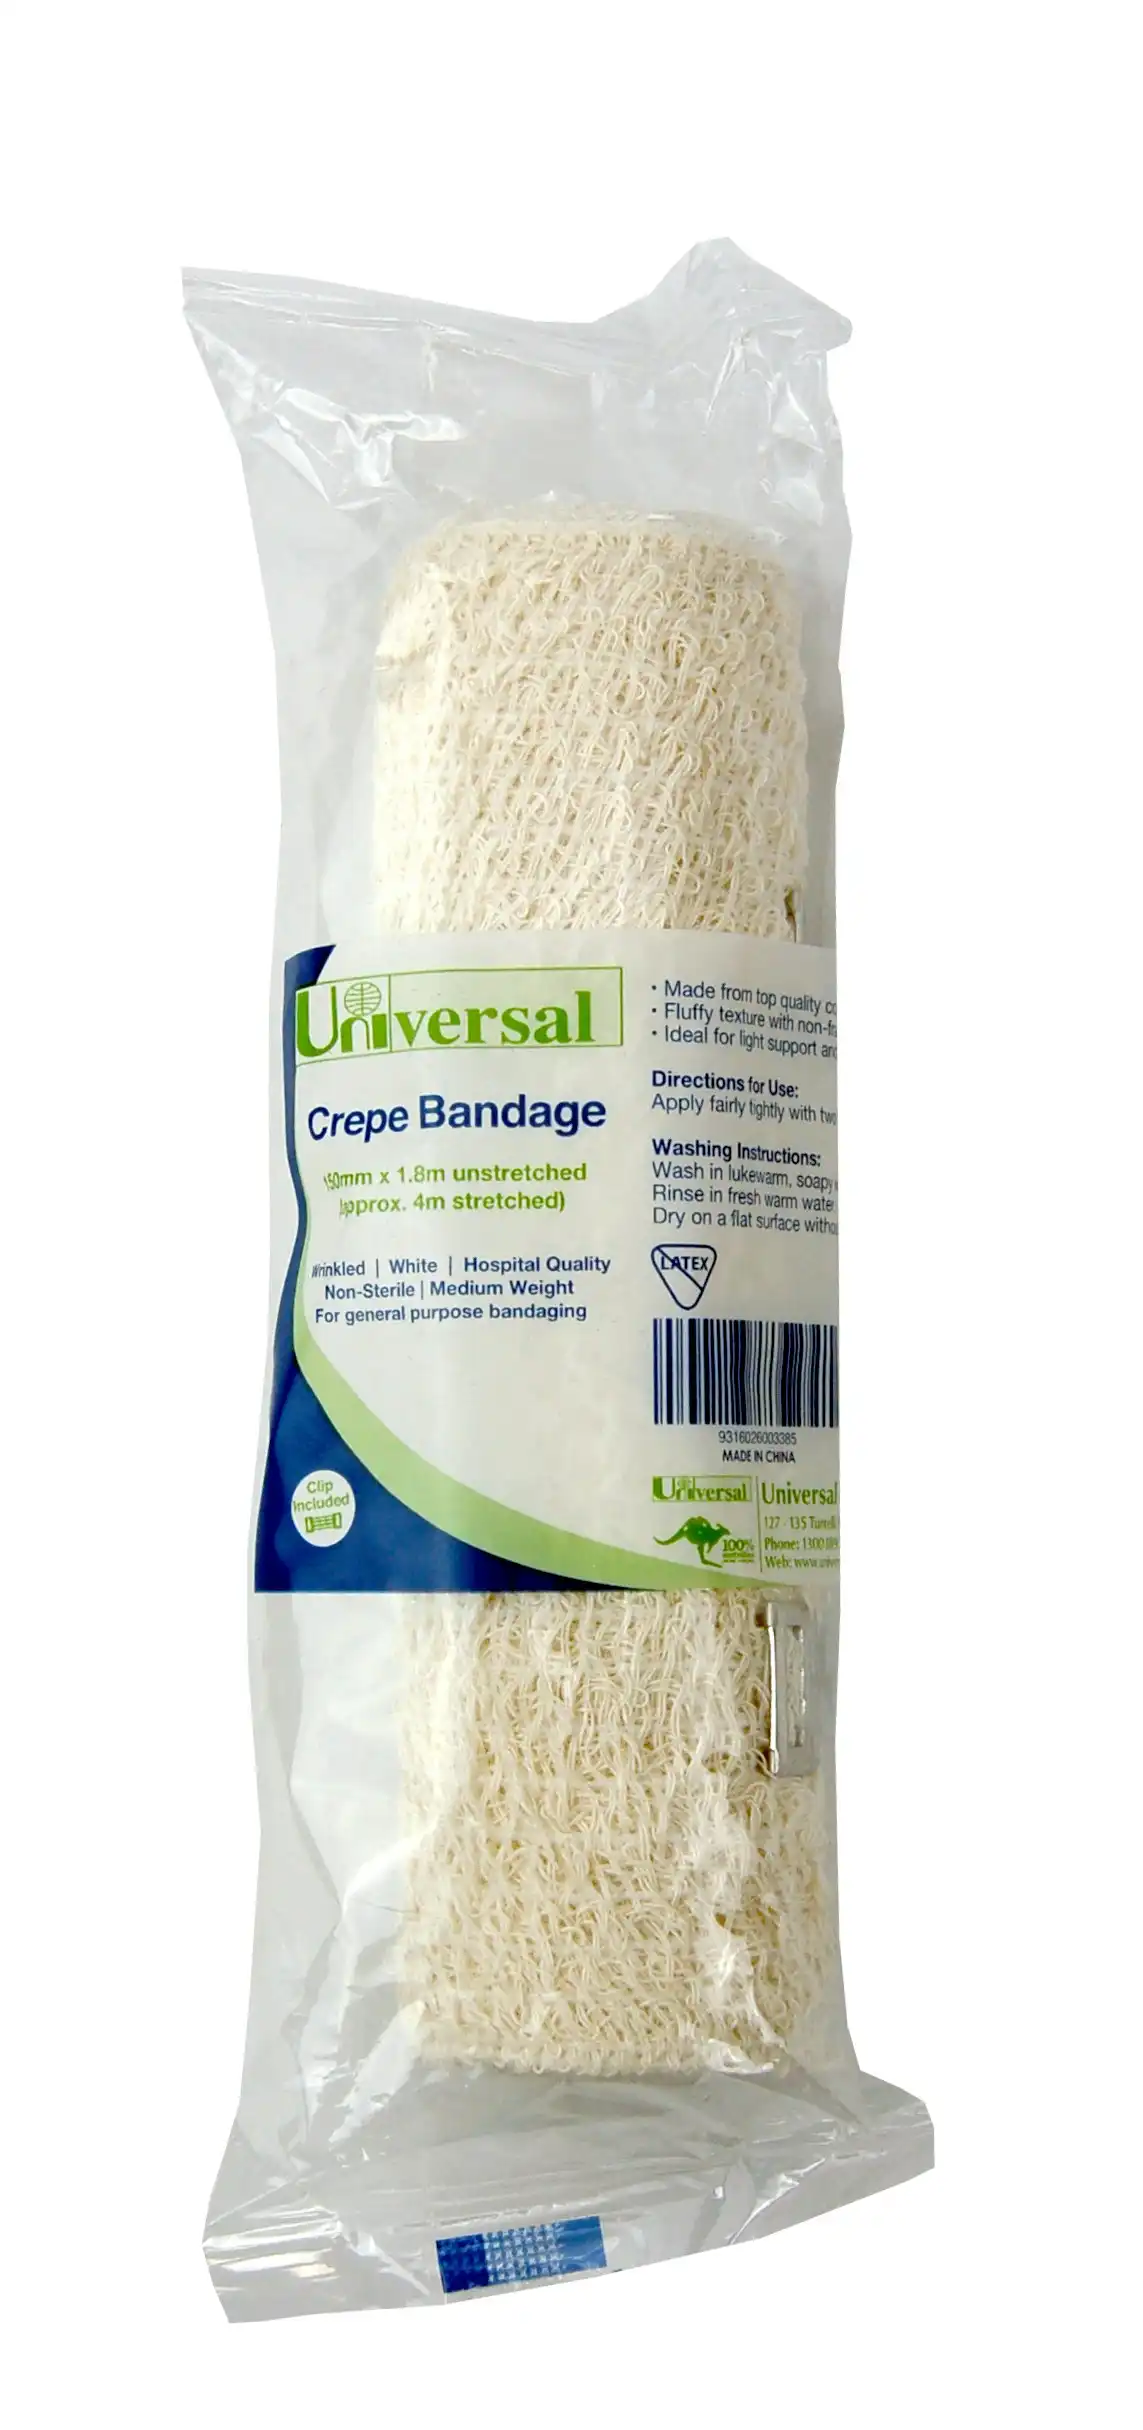 Universal Crepe Bandage Medium Weight 15cm x 1.8m Unstretched 4m Stretched Wrinkled